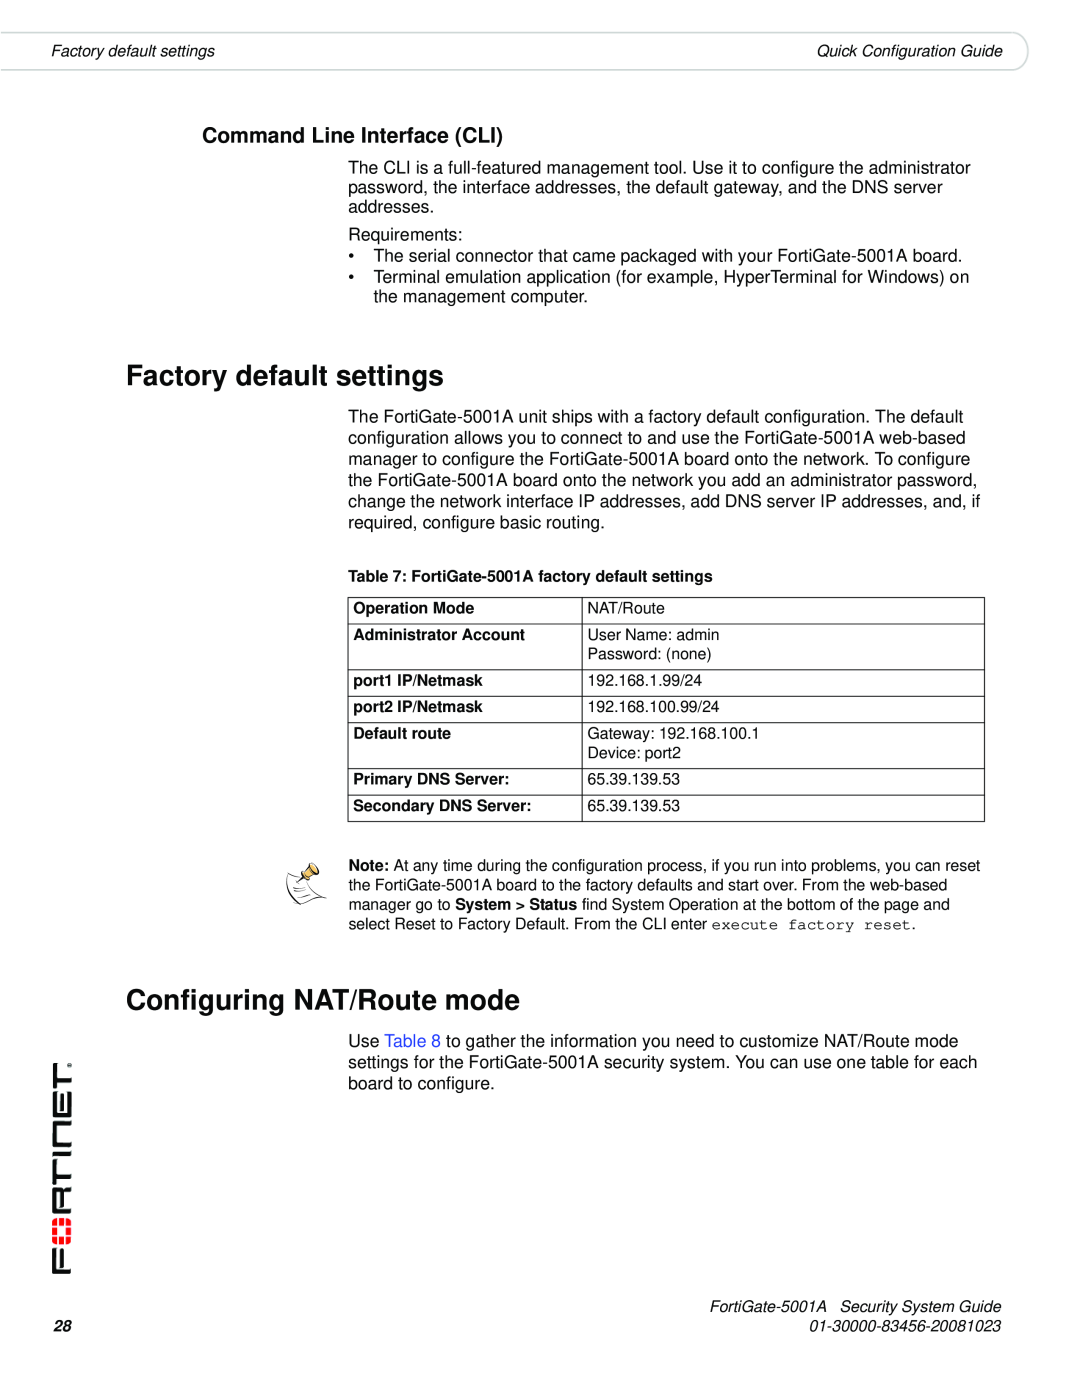 Fortinet 5001A-DW, 5001A-SW manual Factory default settings, Configuring NAT/Route mode, Command Line Interface CLI 